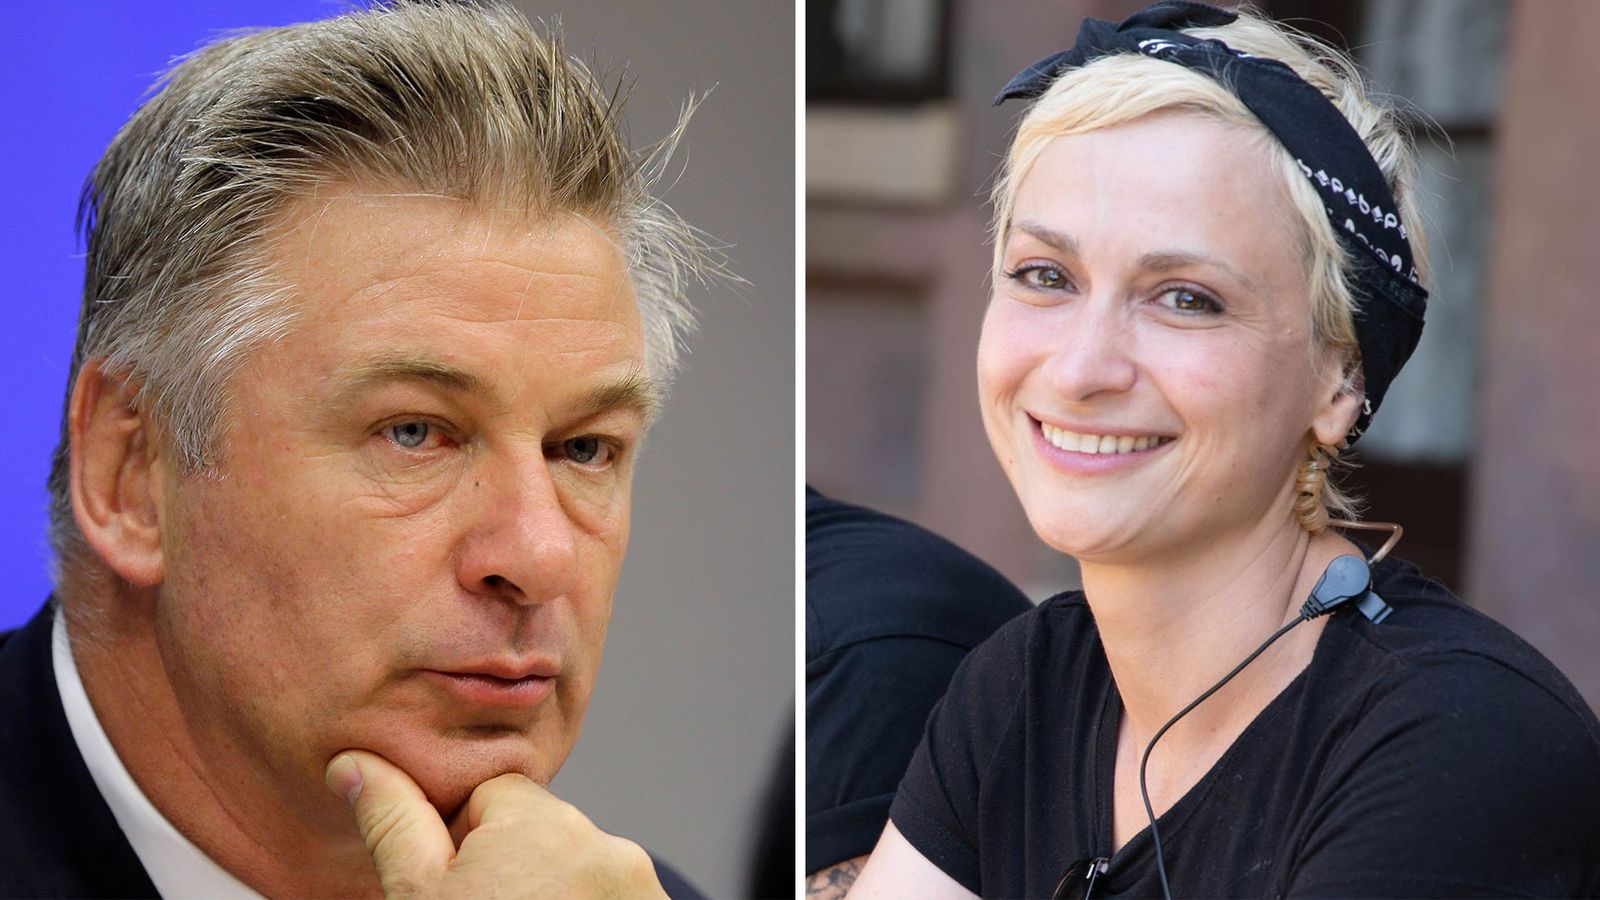 Alec Baldwin and family of cinematographer Halyna Hutchins reach settlement over her death - with Rust filming due to resume